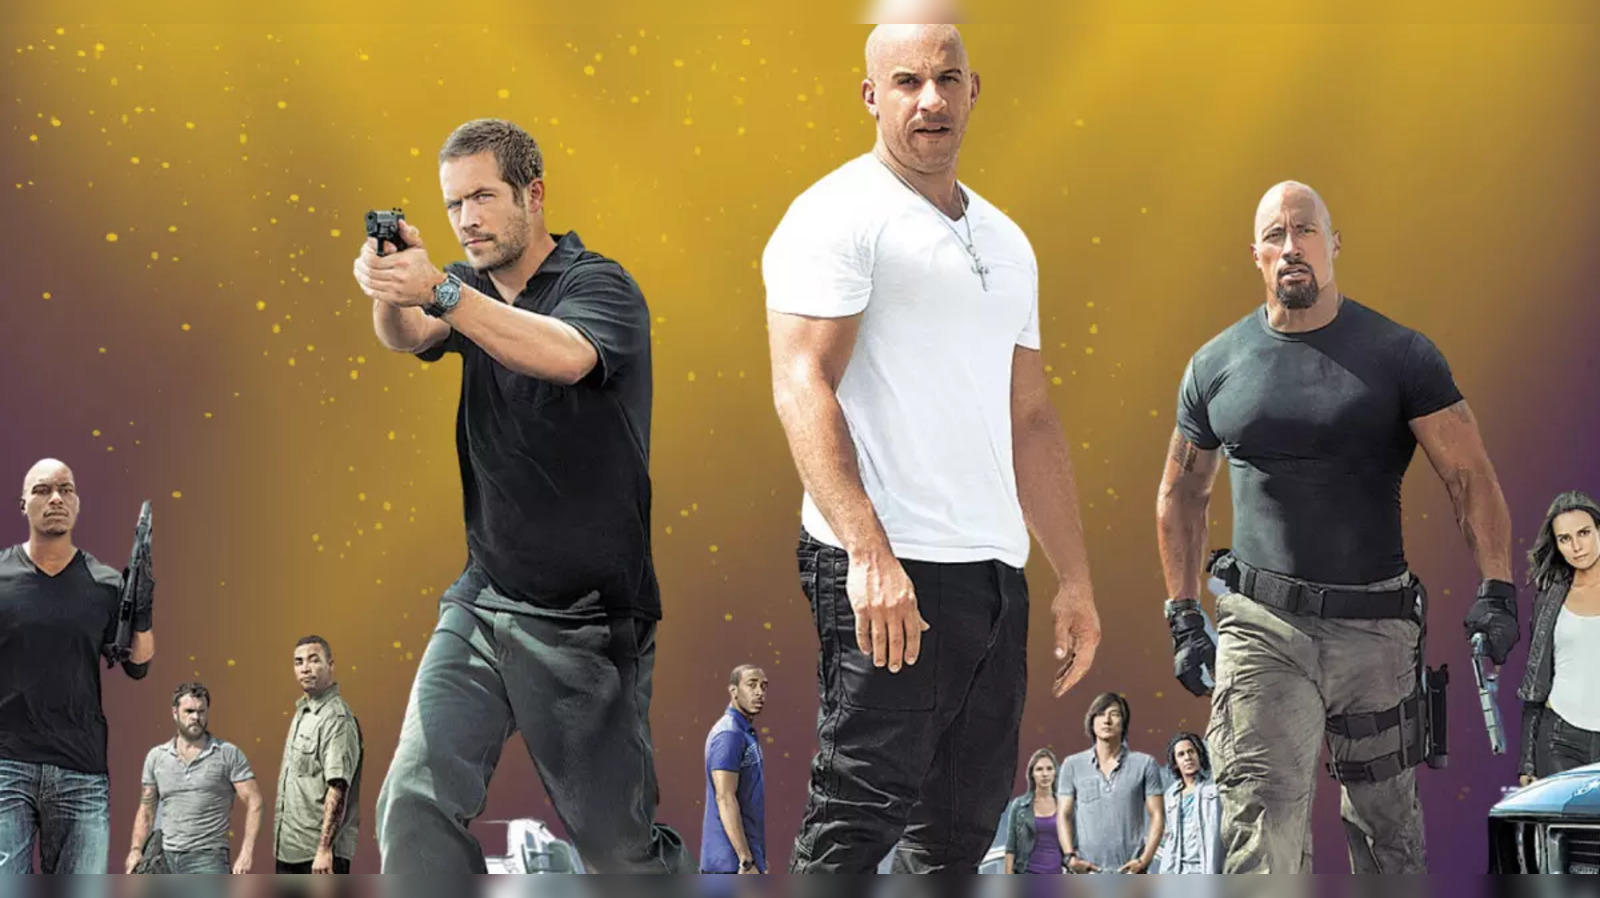 Hobbs & Shaw - Fast & Furious Spinoff Cast, Rumors, Release Date